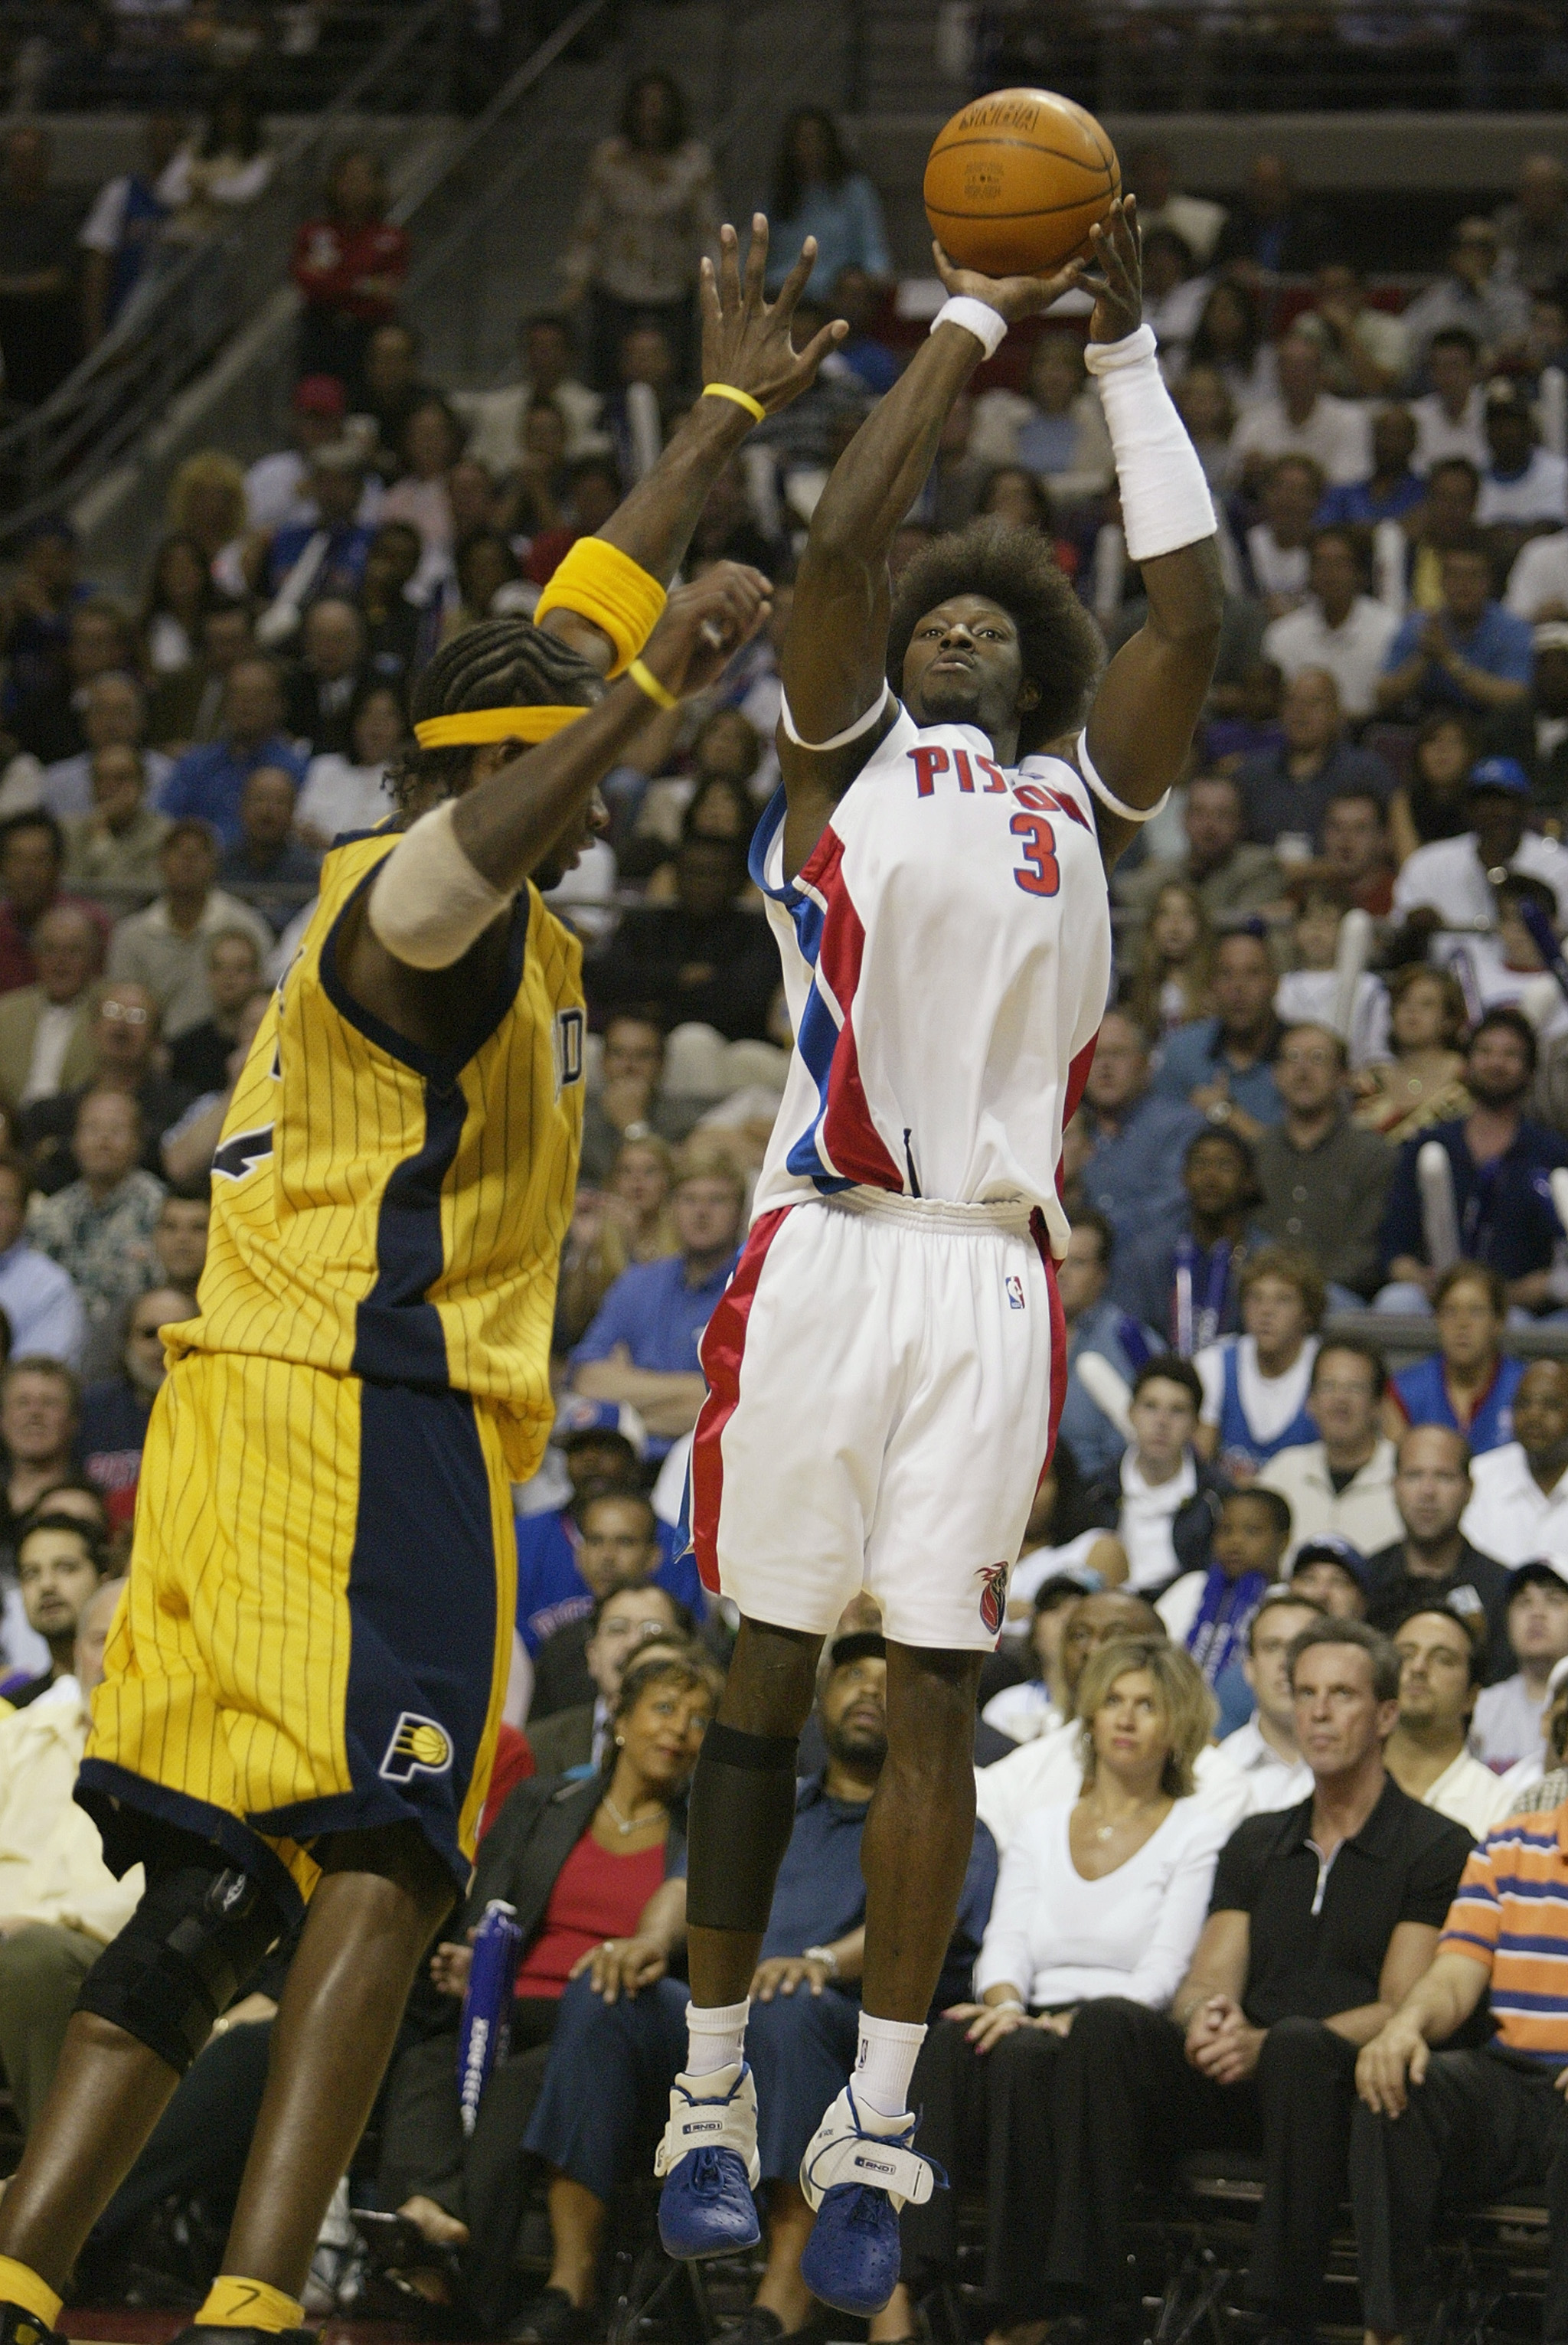 AUBURN HILLS, MI - JUNE 1:  Ben Wallace #3 of the Detroit Pistons shoots over Jermaine O'Neal #7 of the Indiana Pacers in Game six of the Eastern Conference Finals during the 2004 NBA Playoffs at The Palace of Auburn Hills on June 1, 2004 in Auburn Hills,